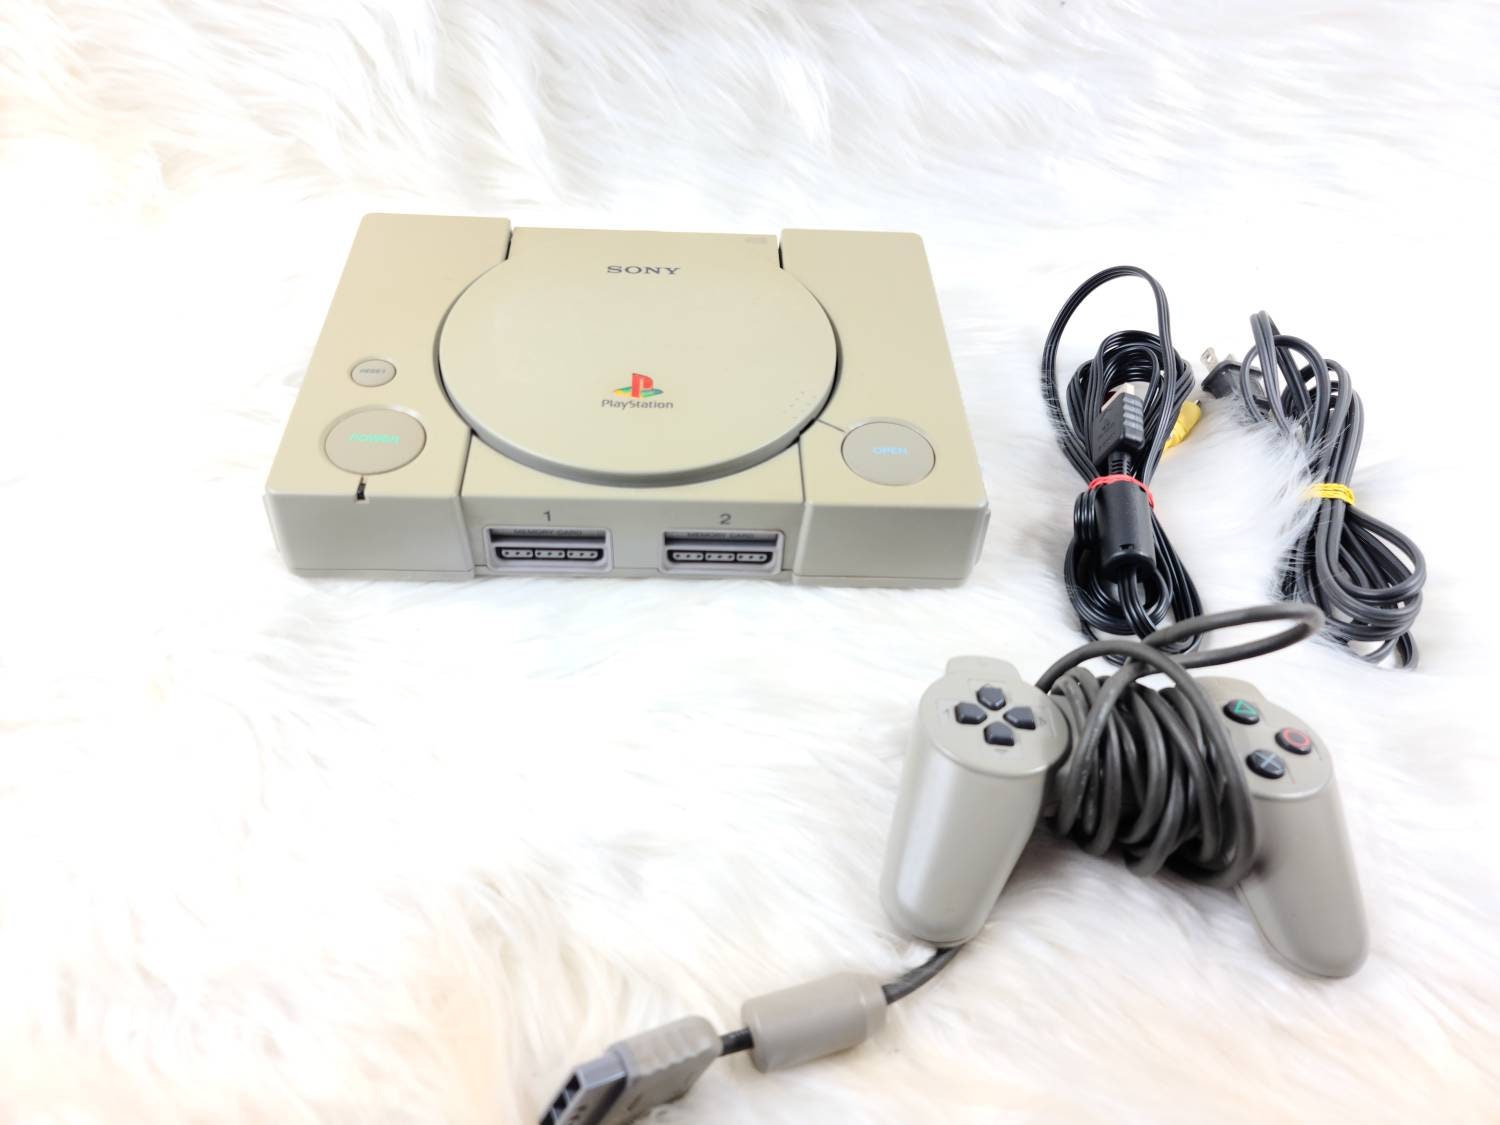 Buy Original Playstation System PS1 Bundle With Controller Online in India -